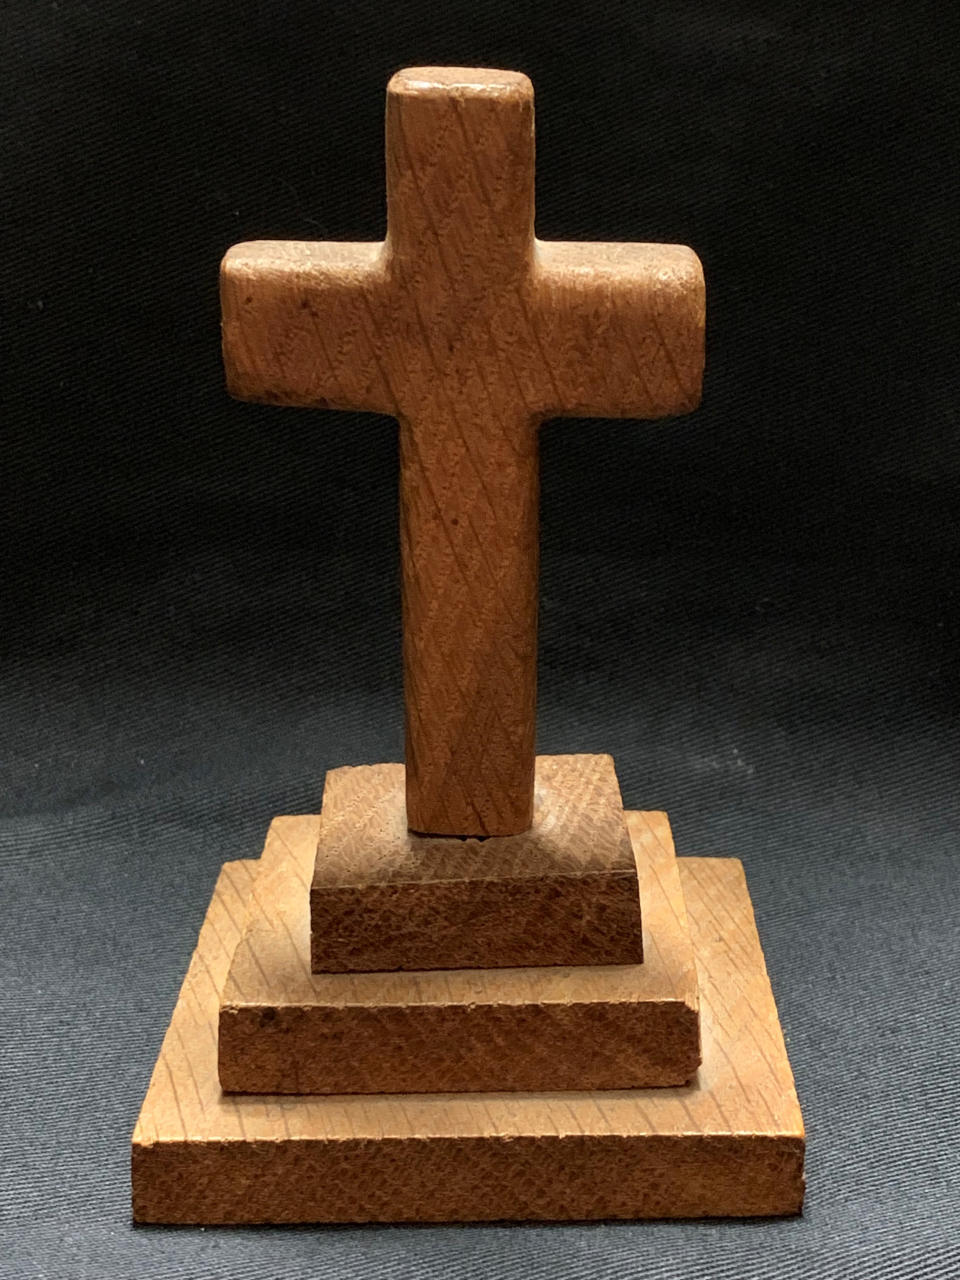 The wooden cross made from oak taken from the Titanic. (PA)